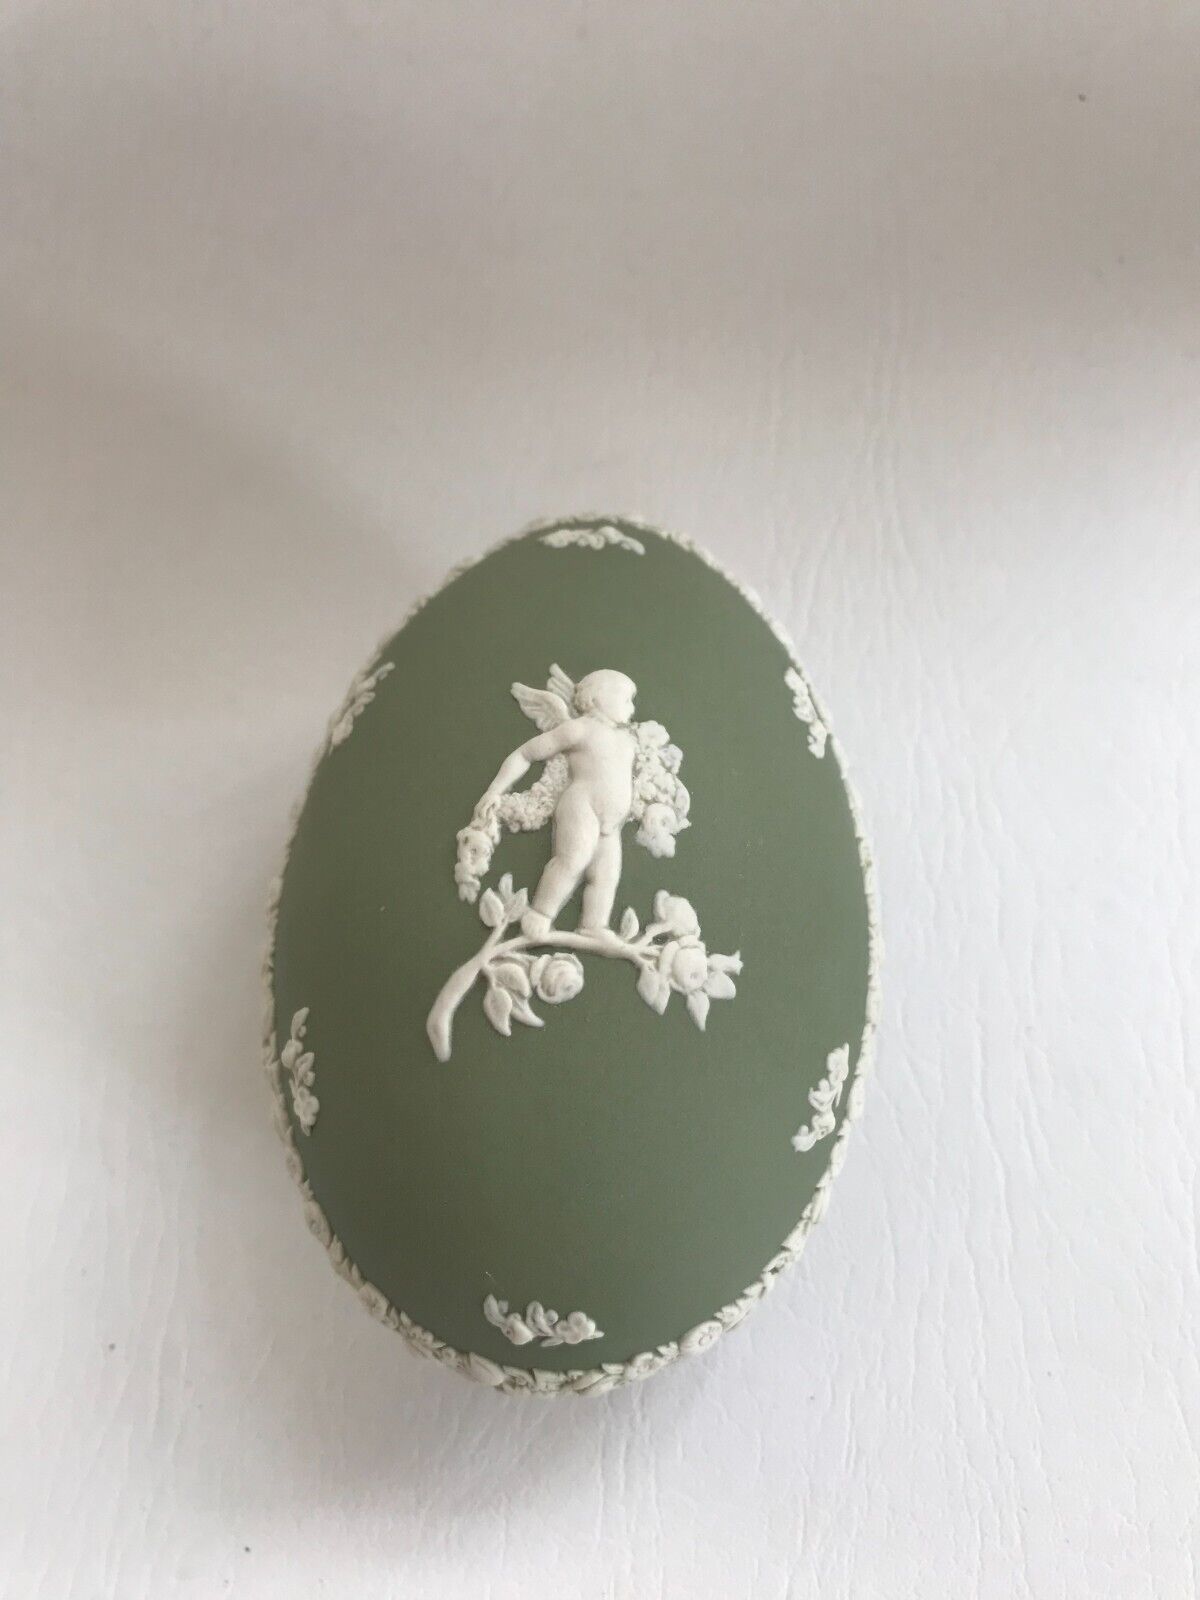 Large Wedgwood Green Jasperware Egg Trinket Box in excellent condition